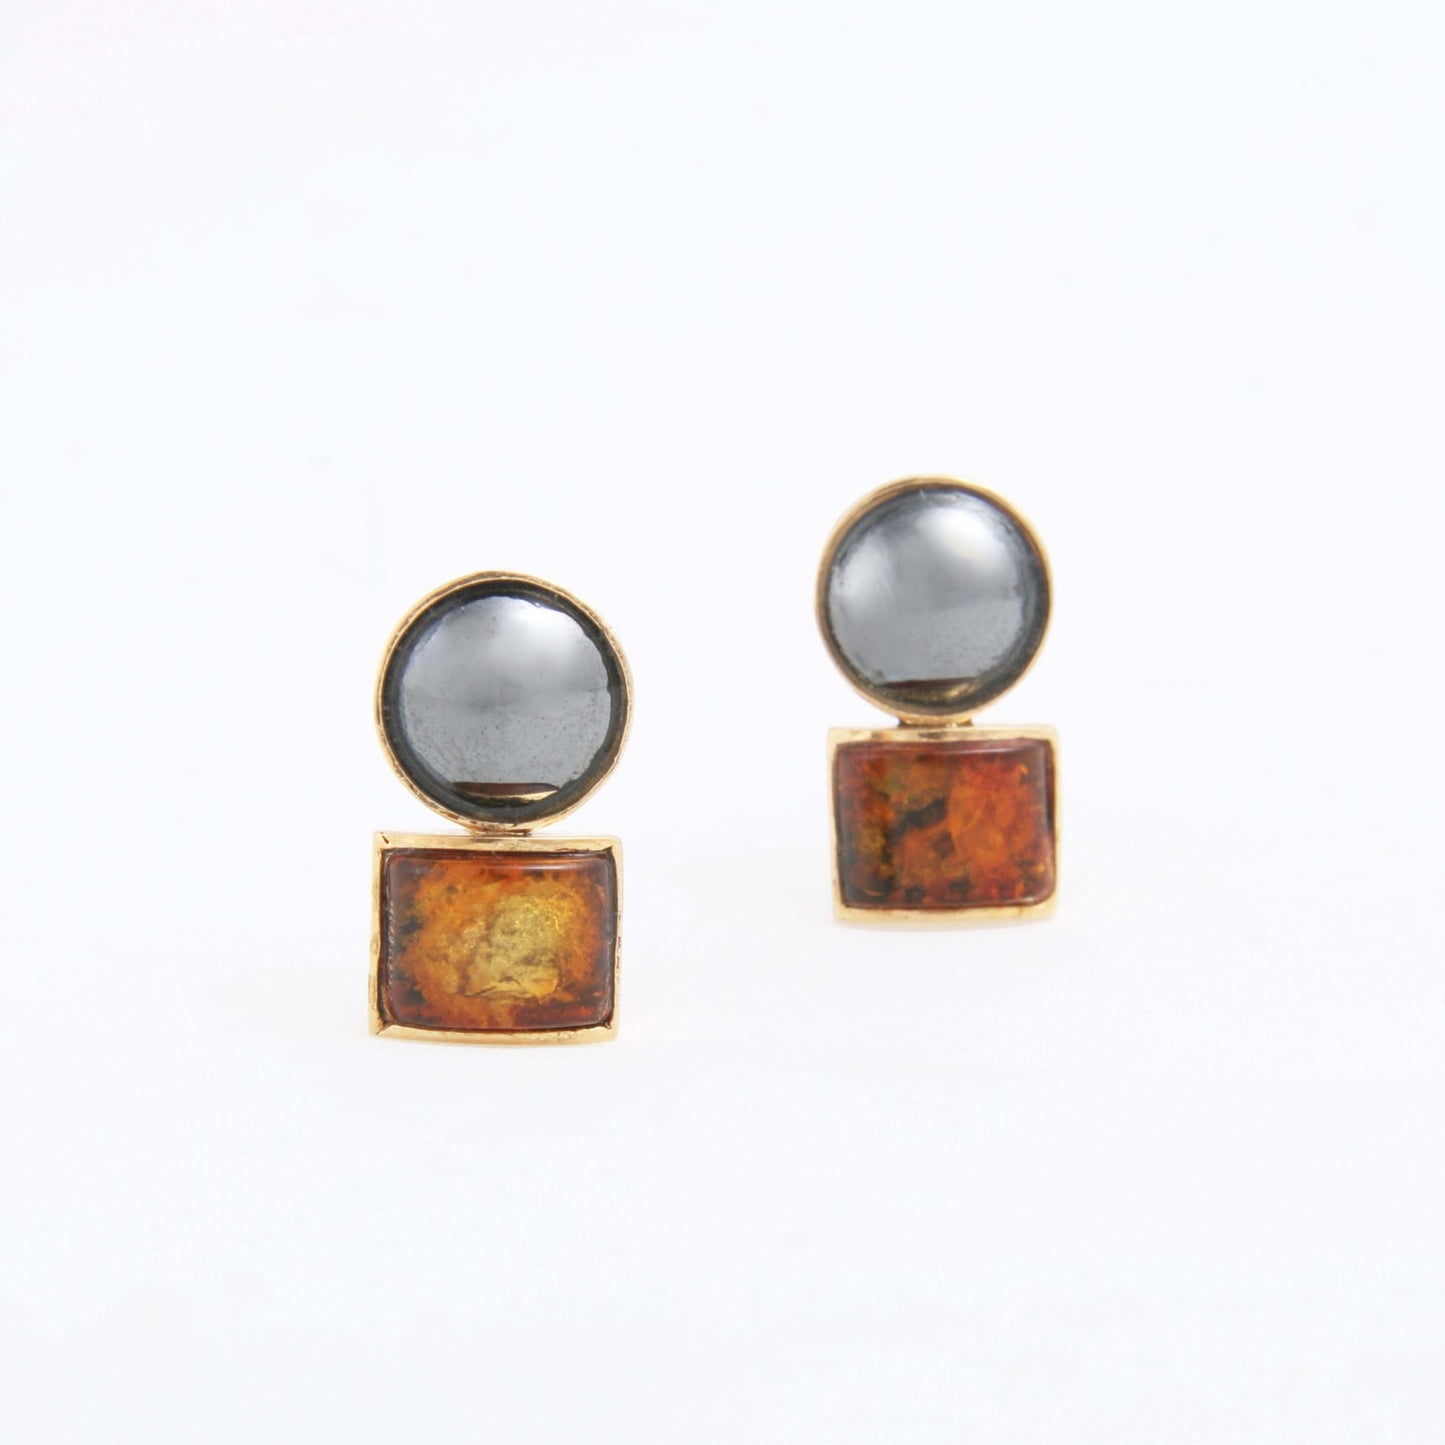 The Swali Gold, Amber and Hematite Ear Studs by Rasvihar